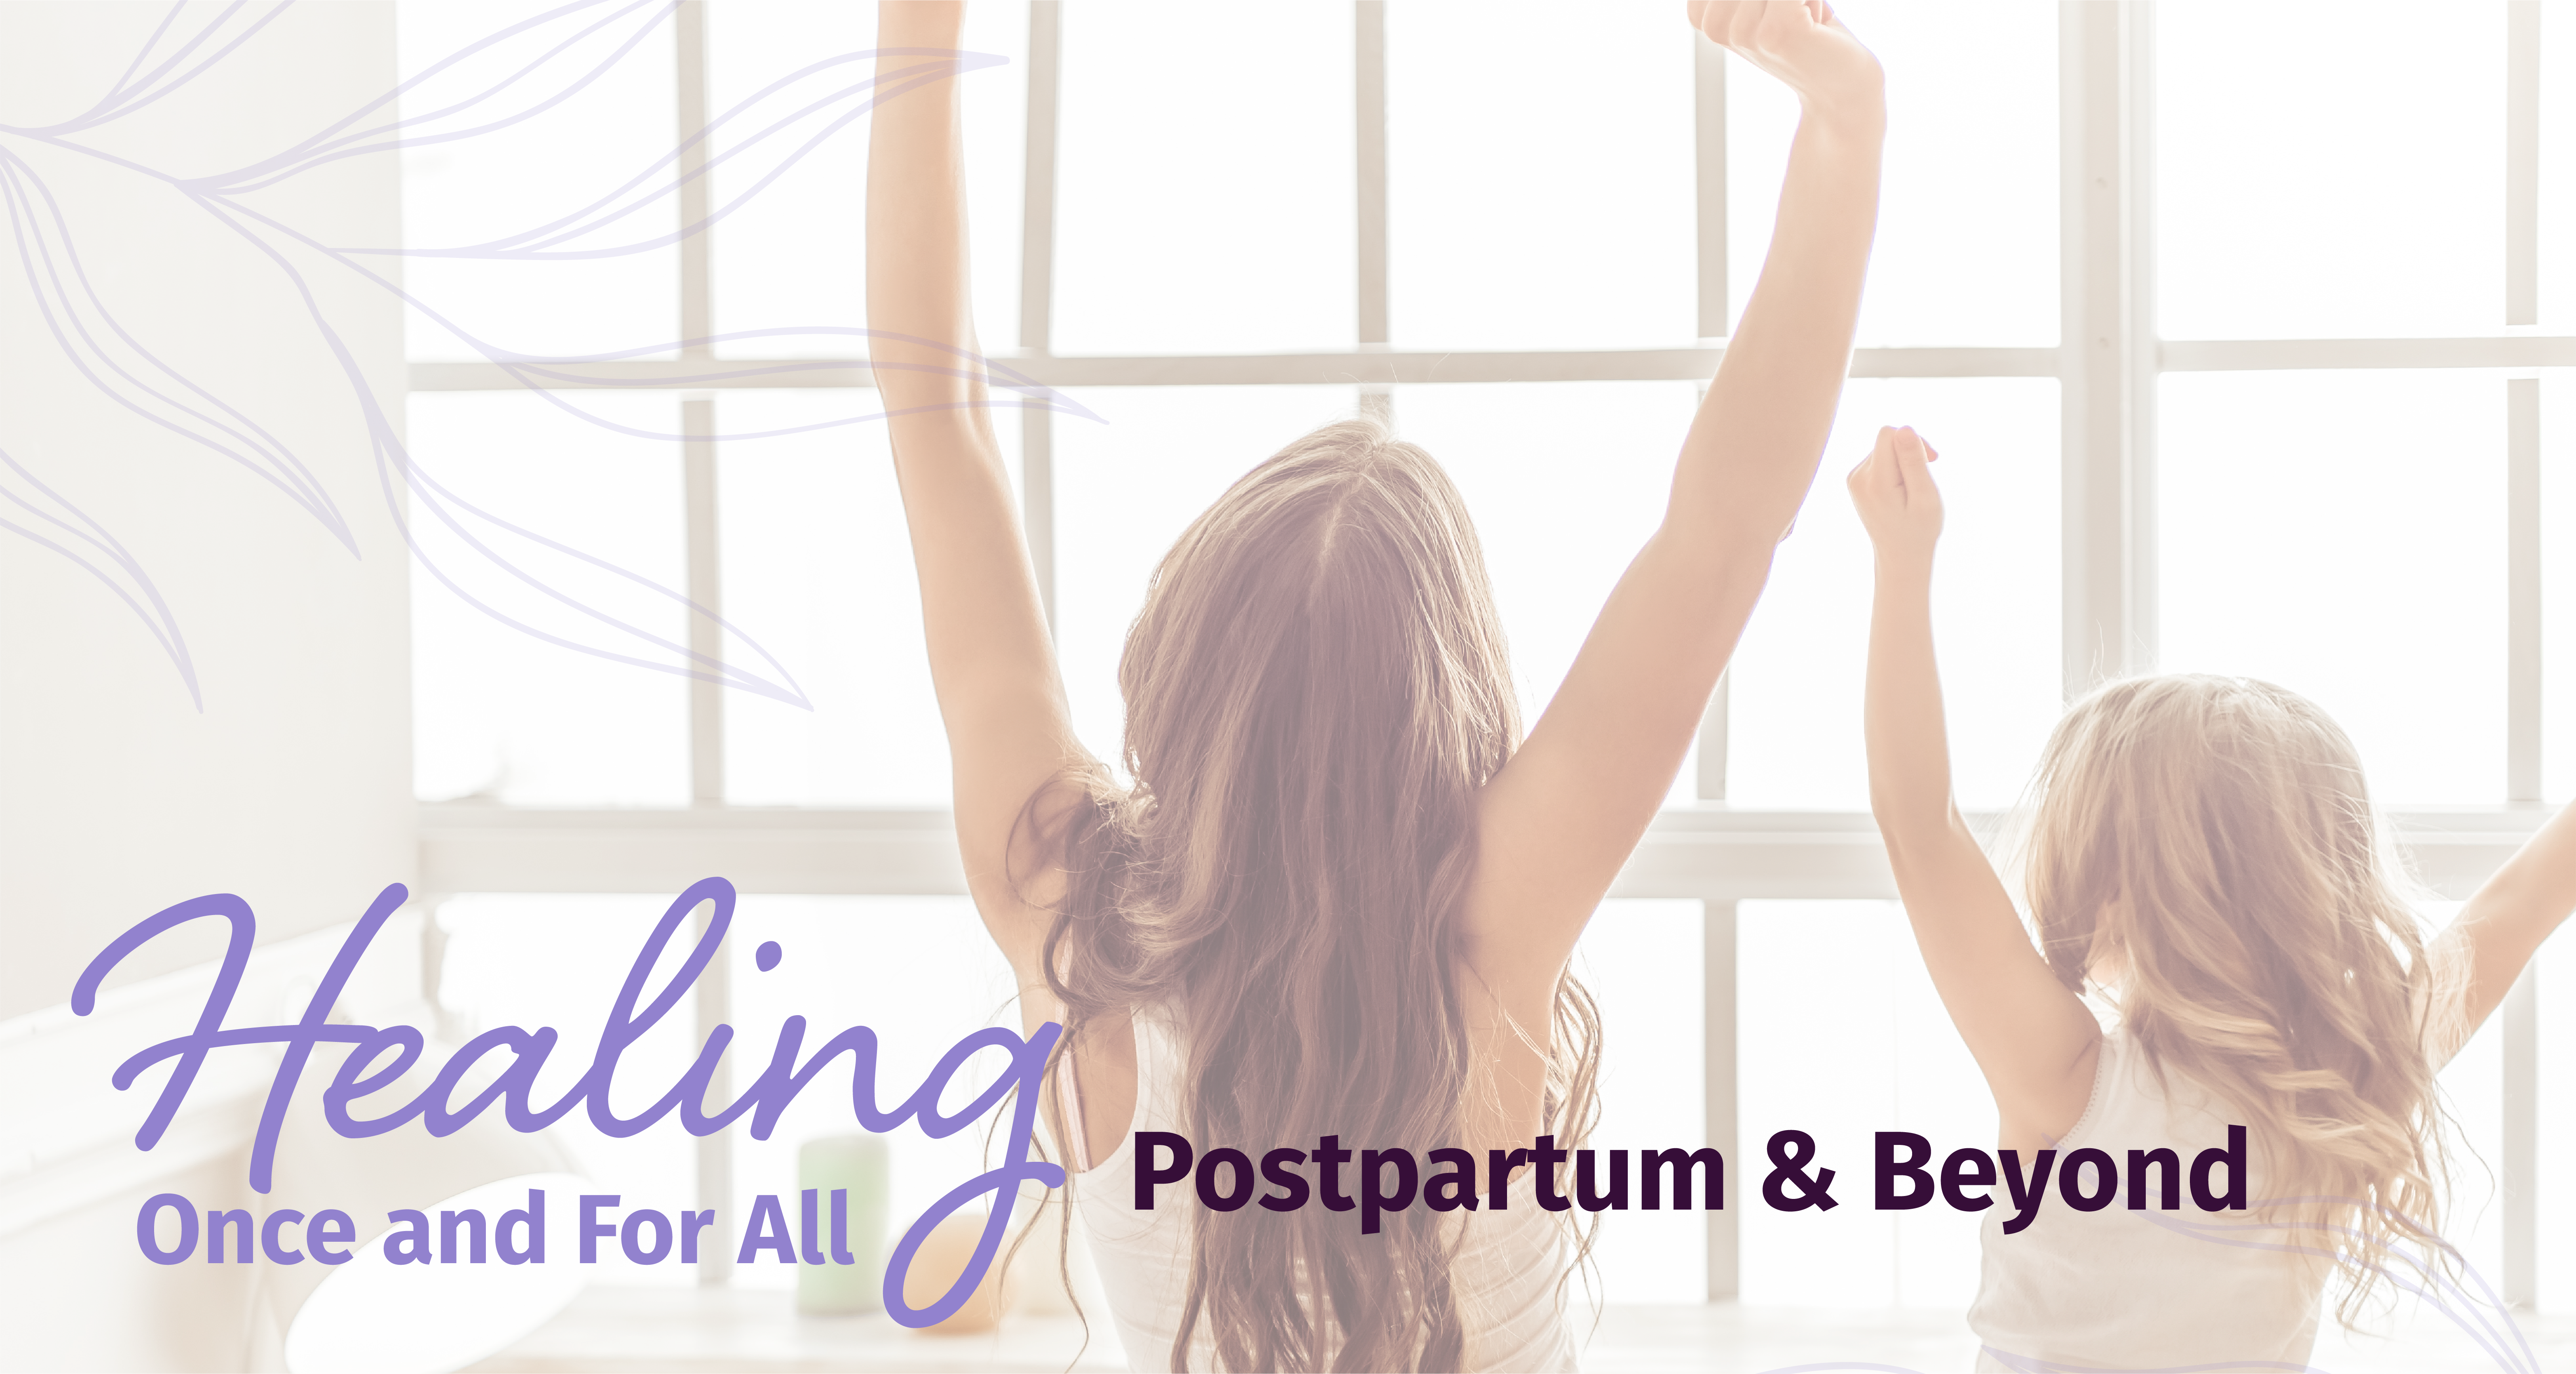 Jenn Lane Healing Once and For All: Postpartum & Beyond